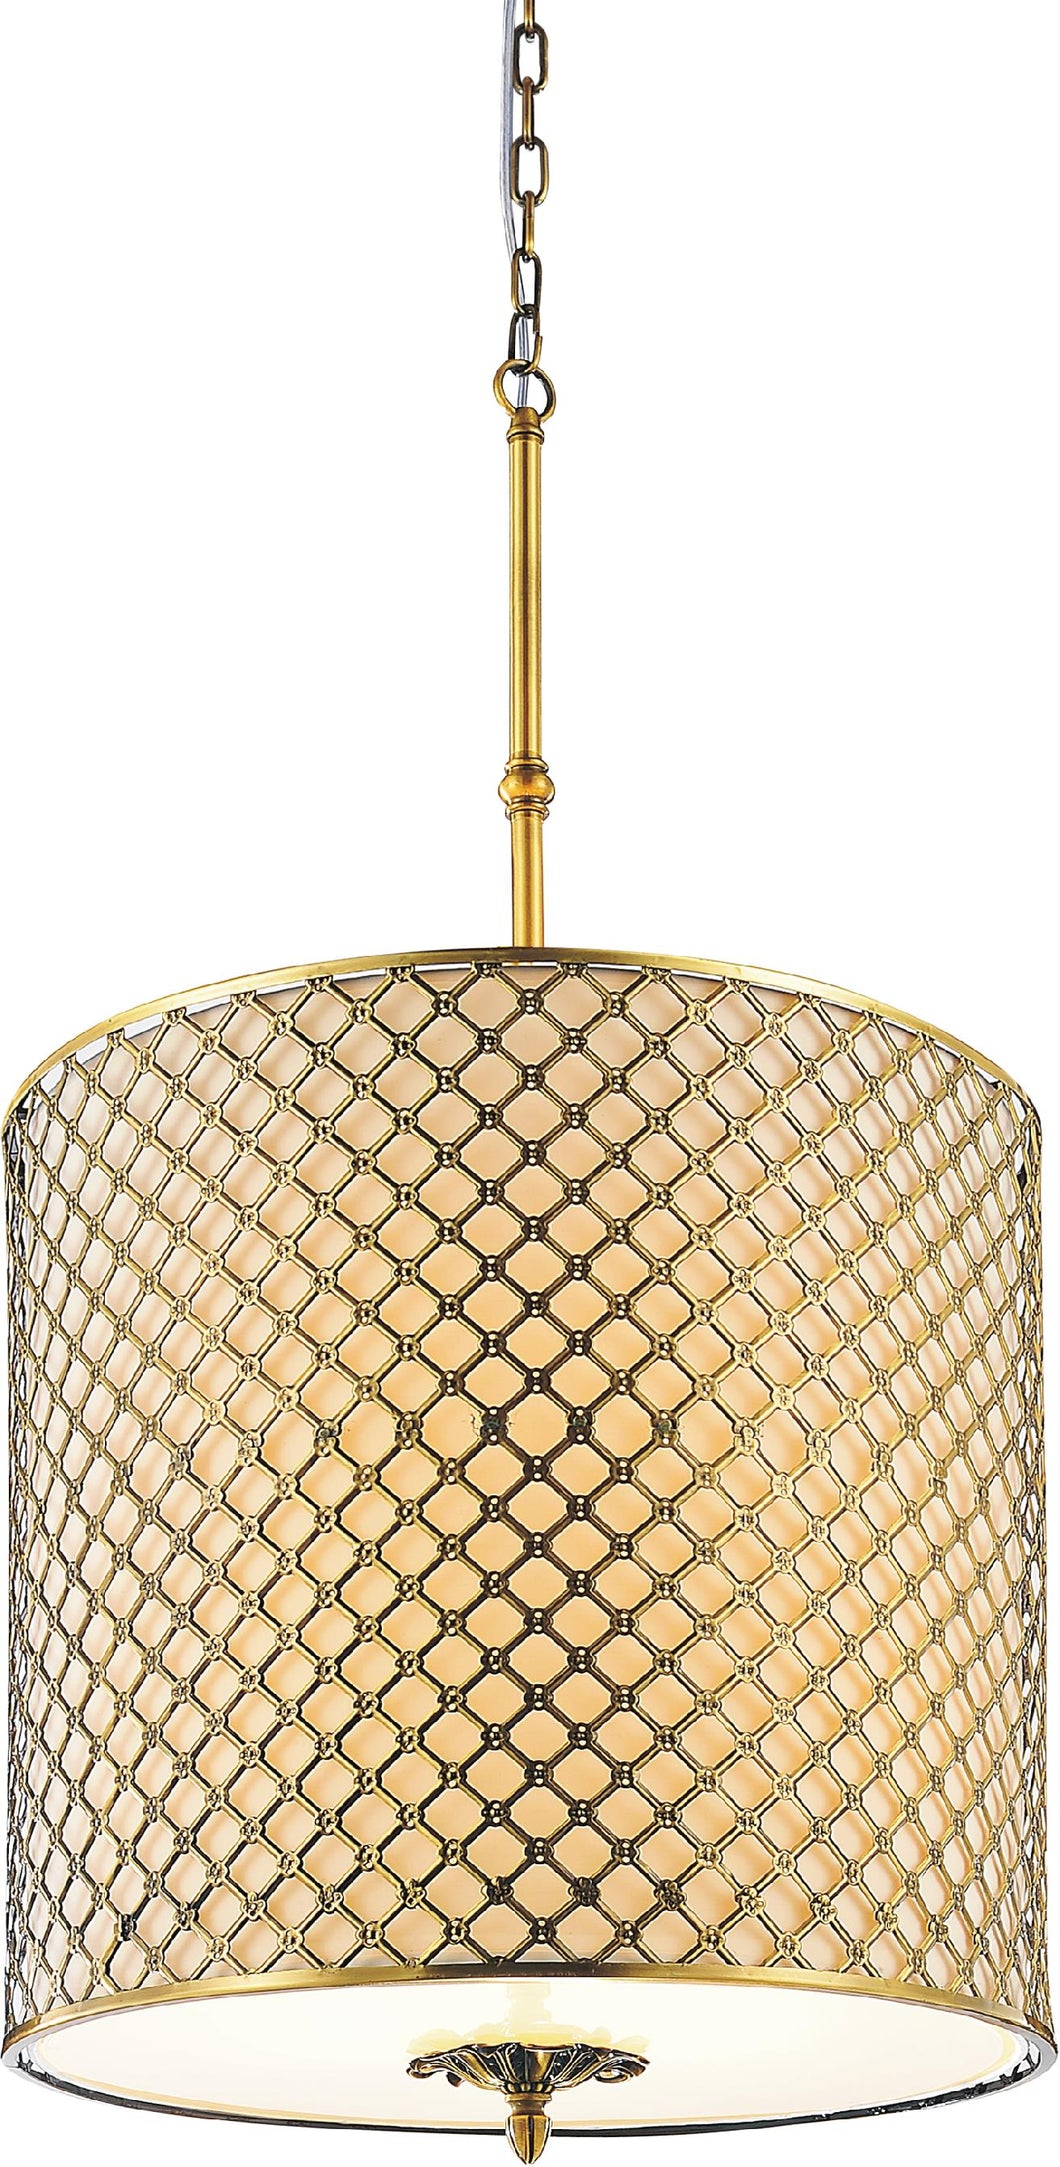 4 Light Drum Shade Chandelier with French Gold finish